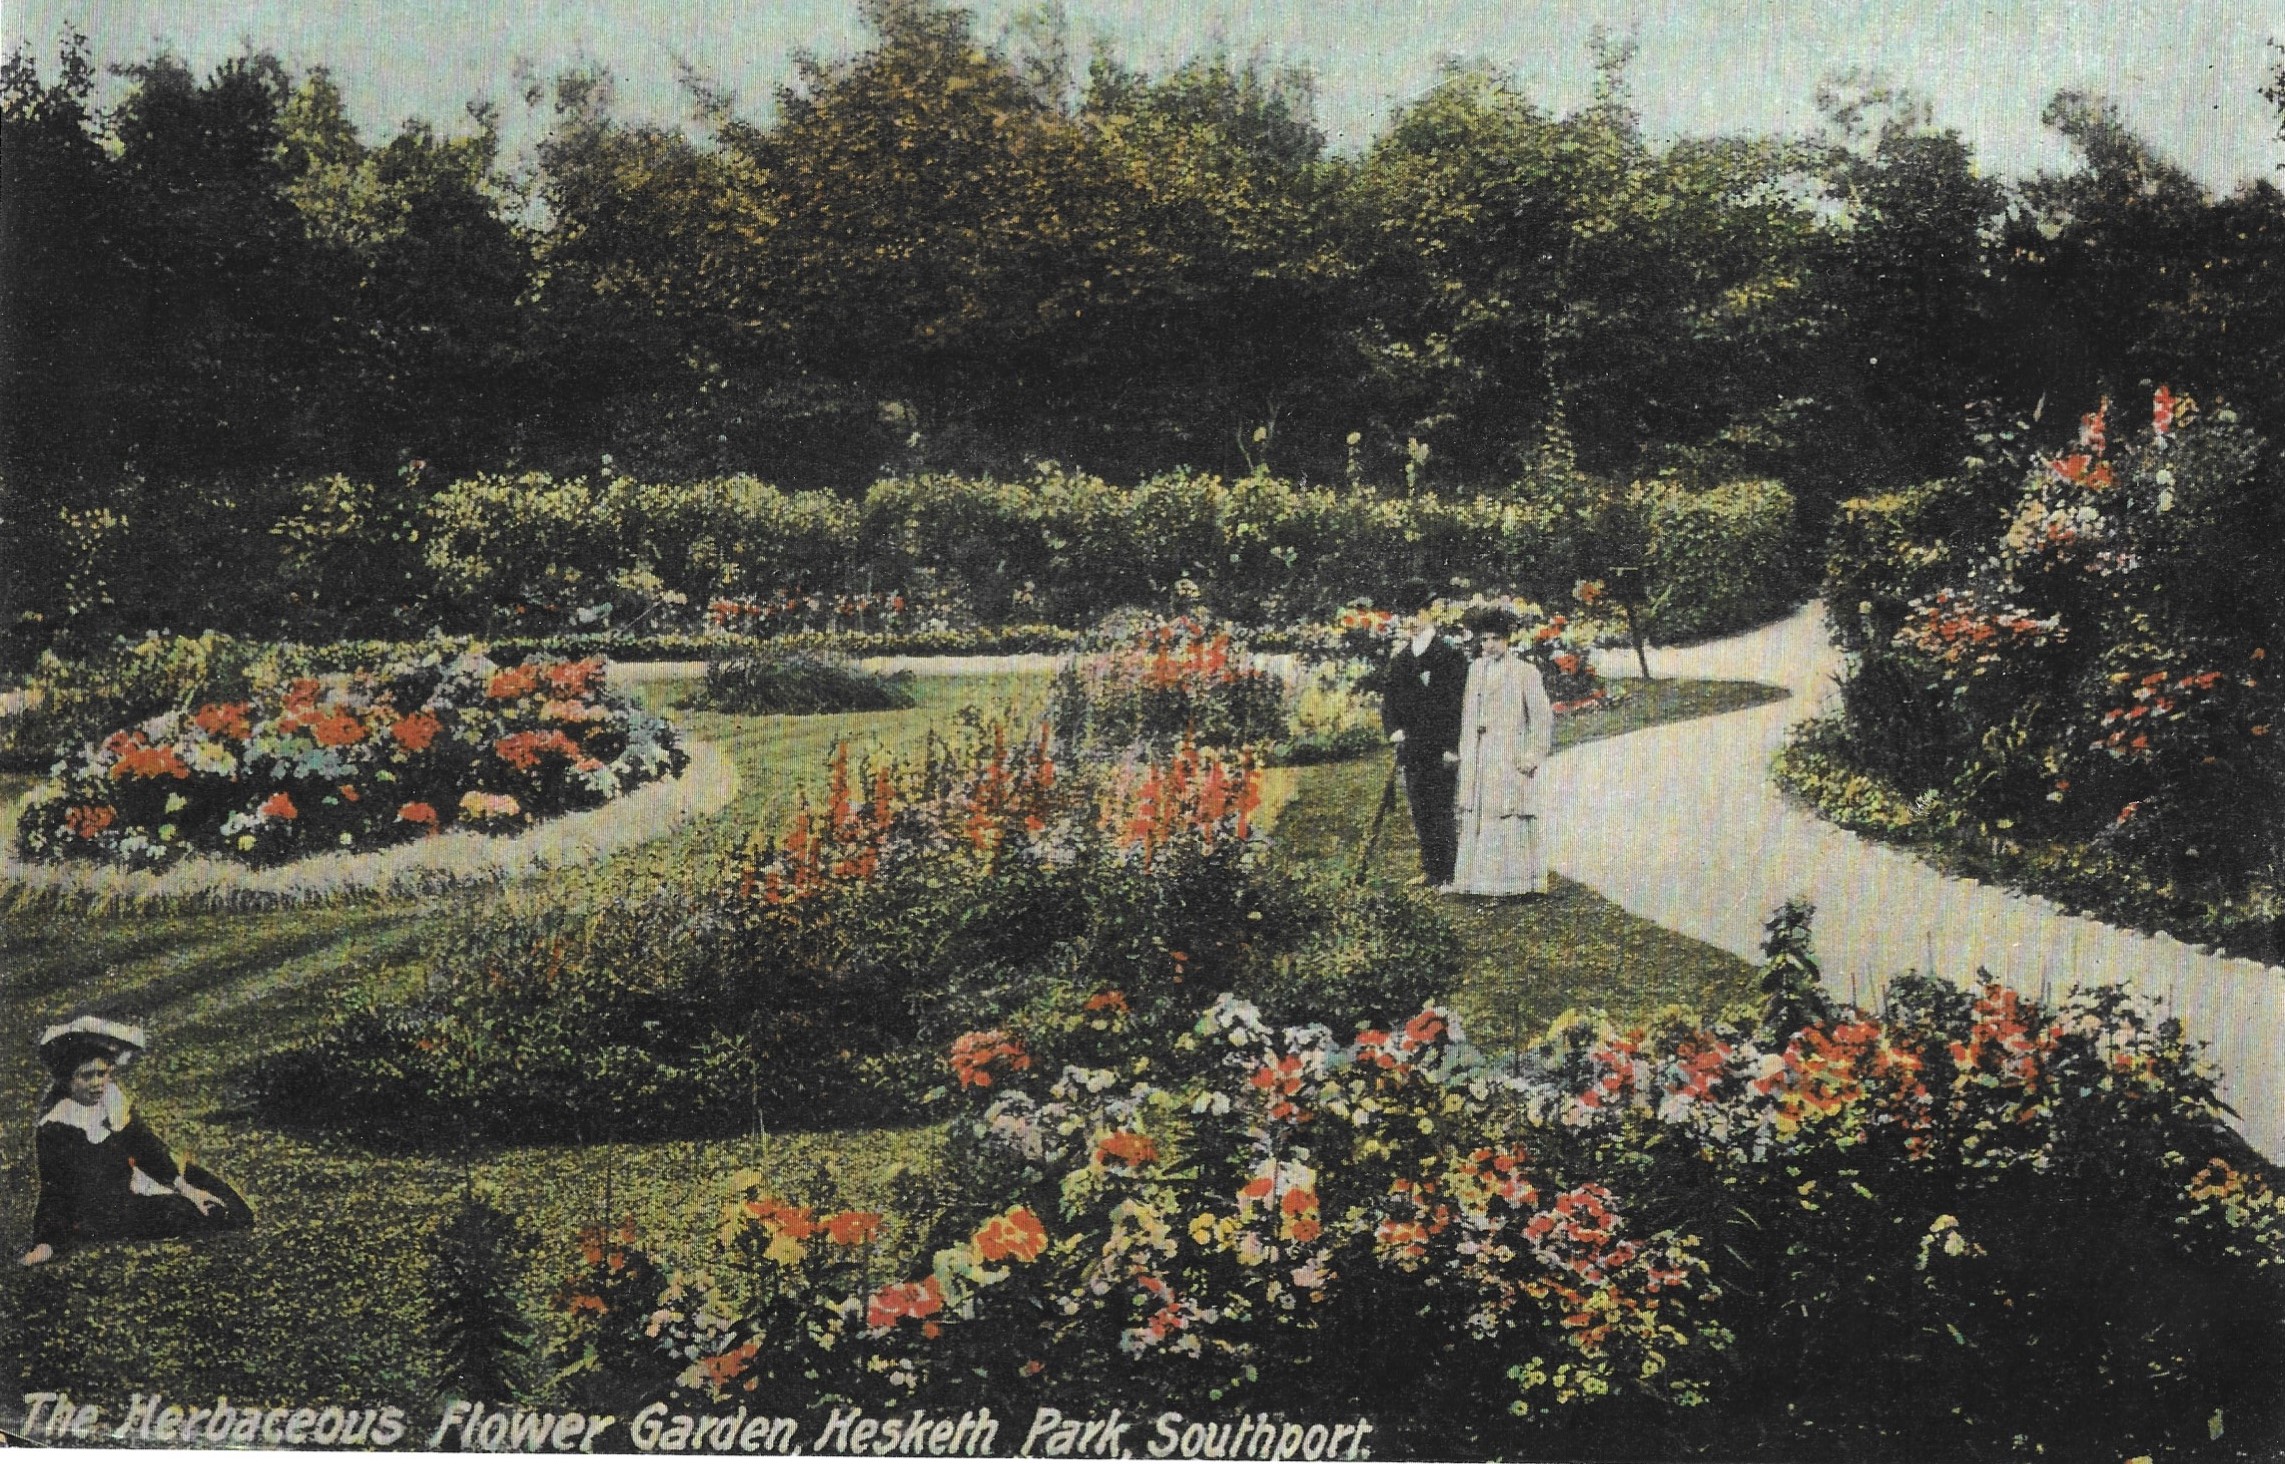 The herbaceous flower garden at Hesketh Park in Southport